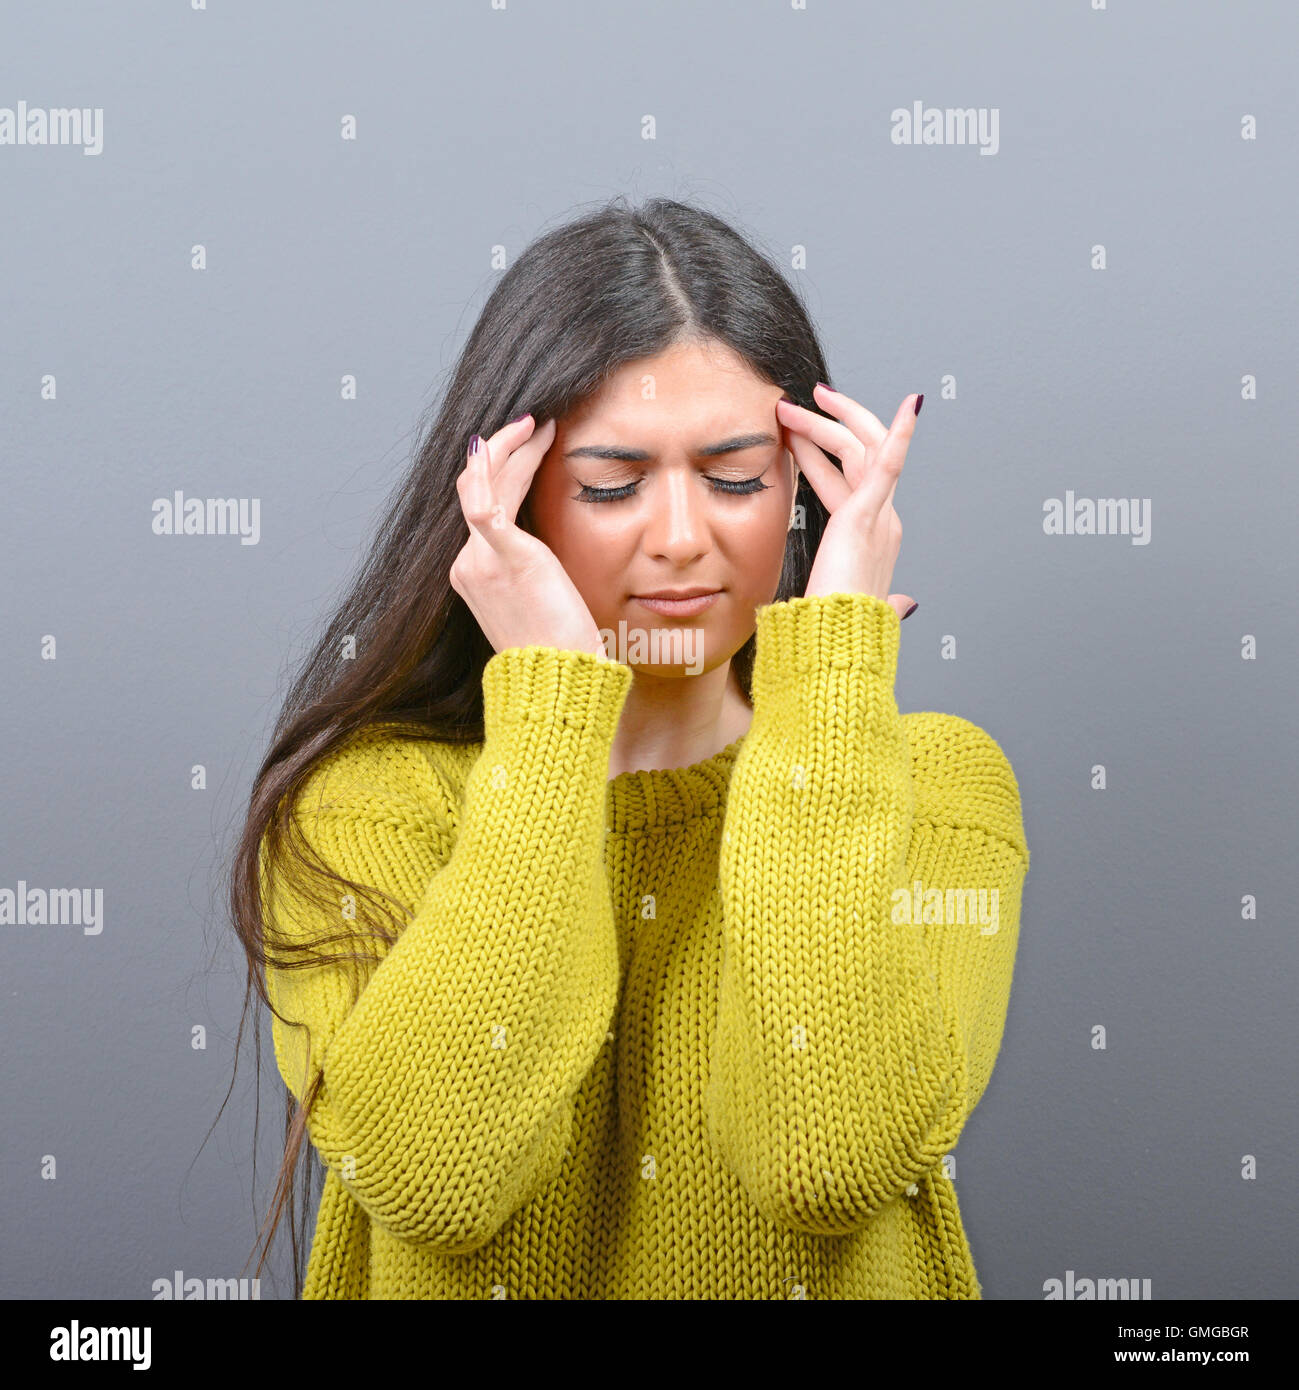 Portrait of woman concentrating against gray background Stock Photo